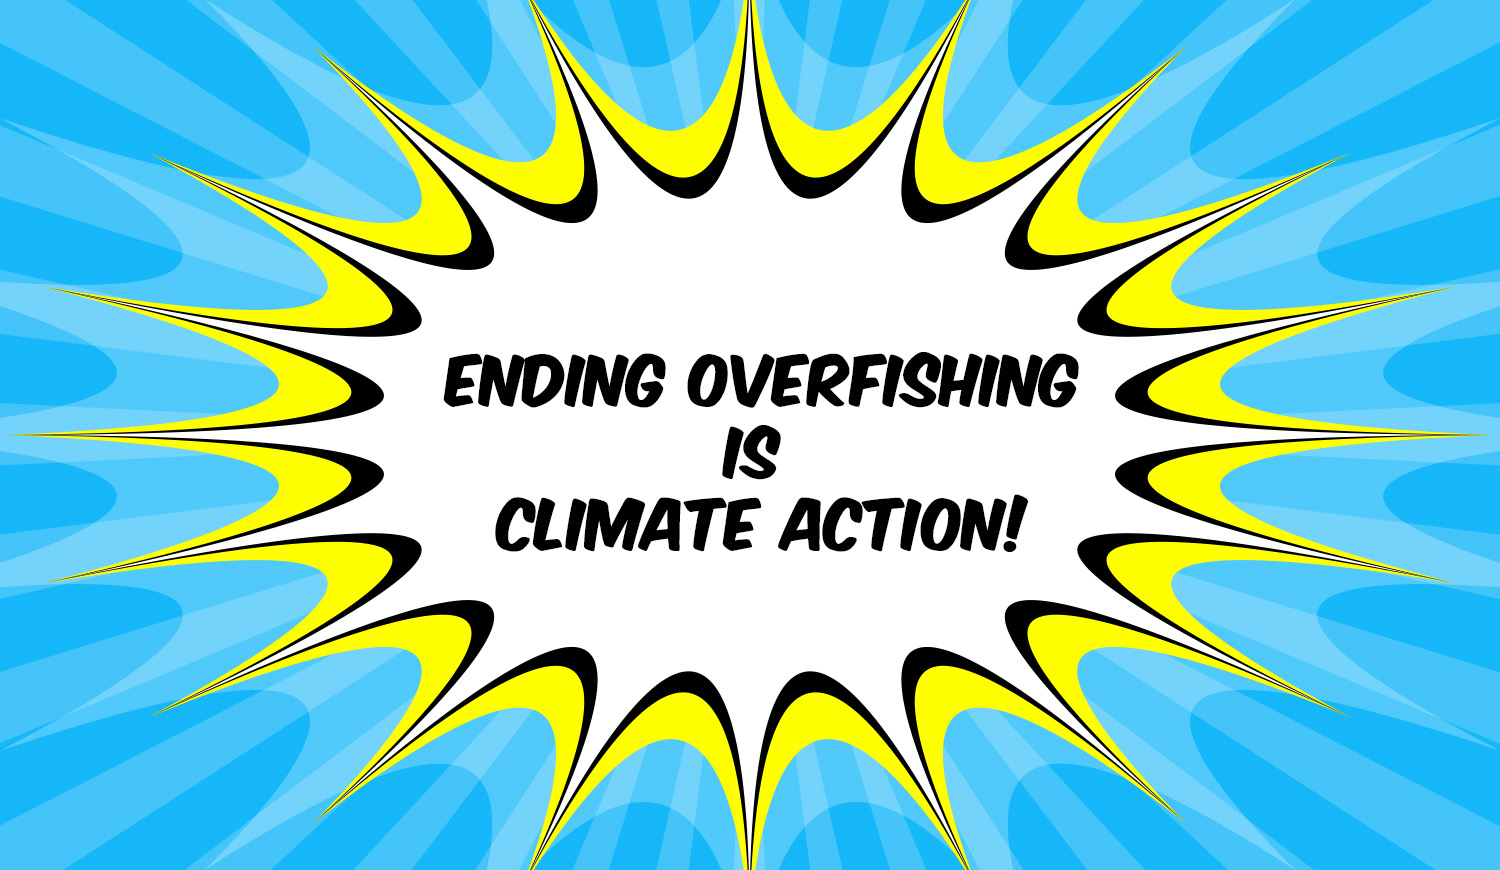 Ending Overfishing IS Climate Action